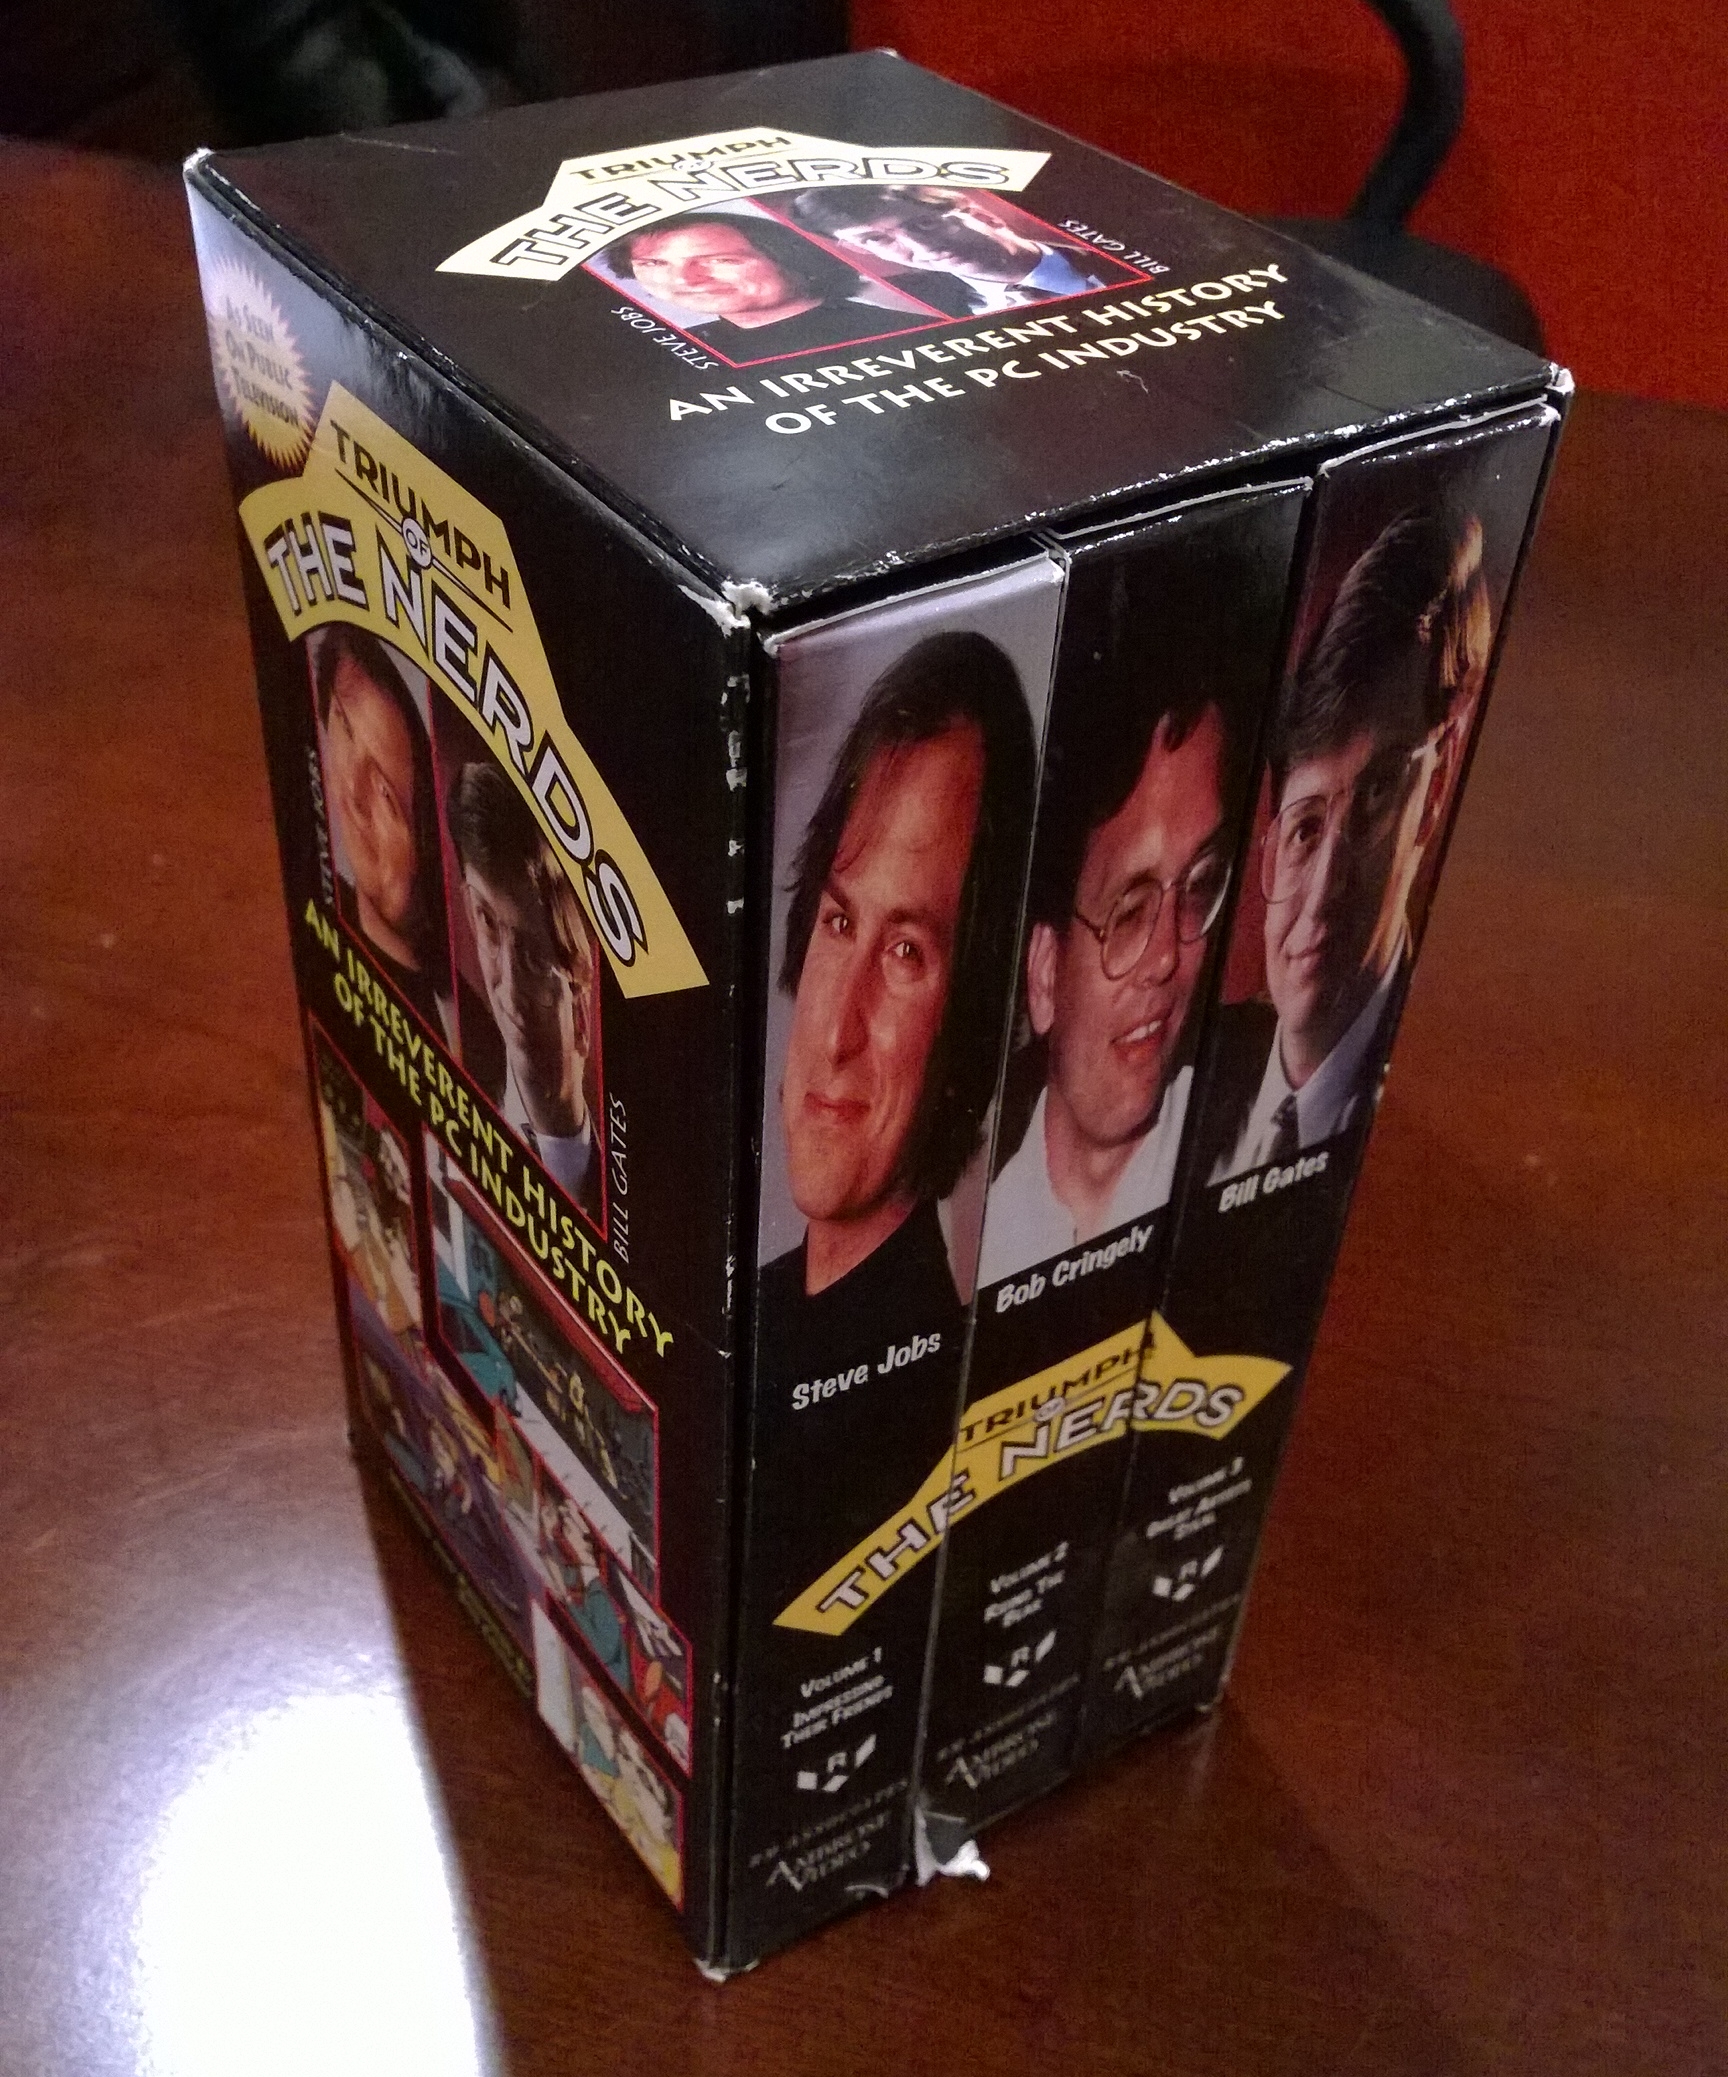 My copy on glorious VHS, in case you doubt my sincerity